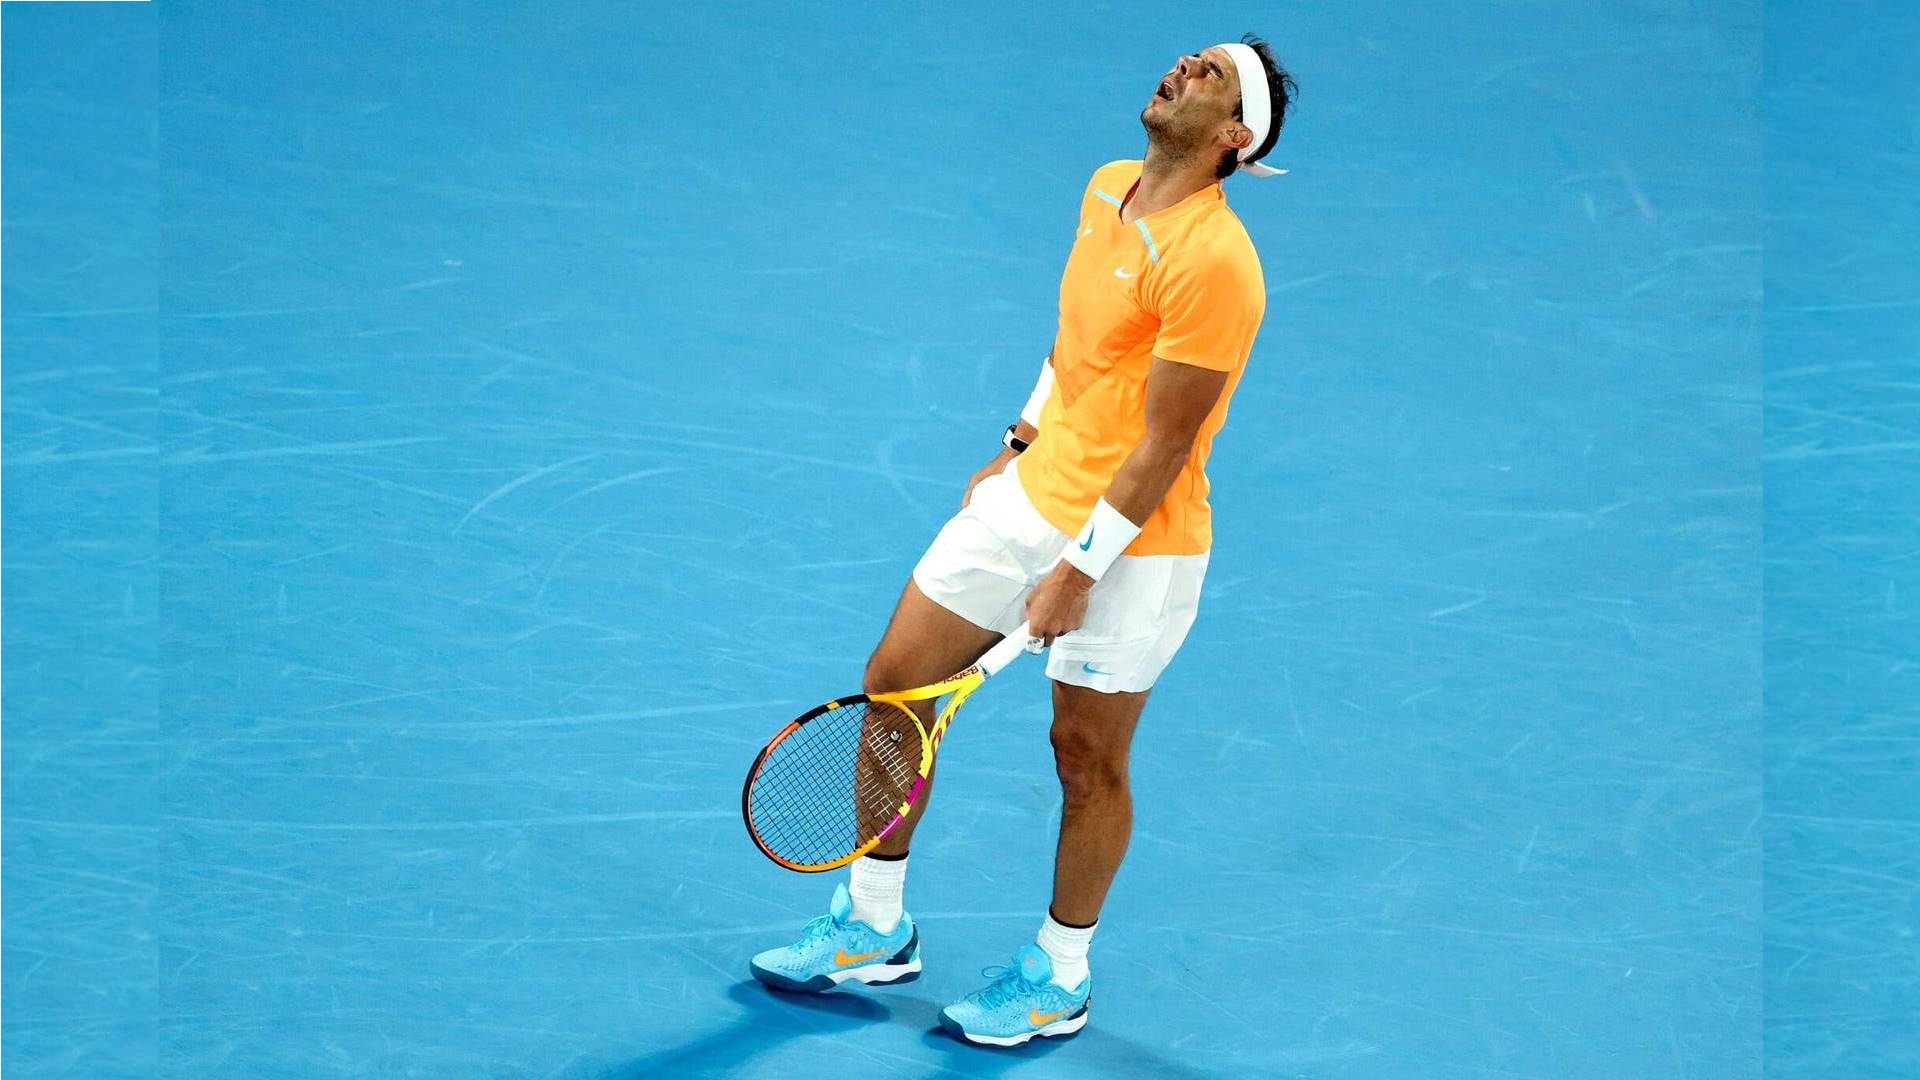 Top-Seeded Rafael Nadal Loses at Australian Open After Injury